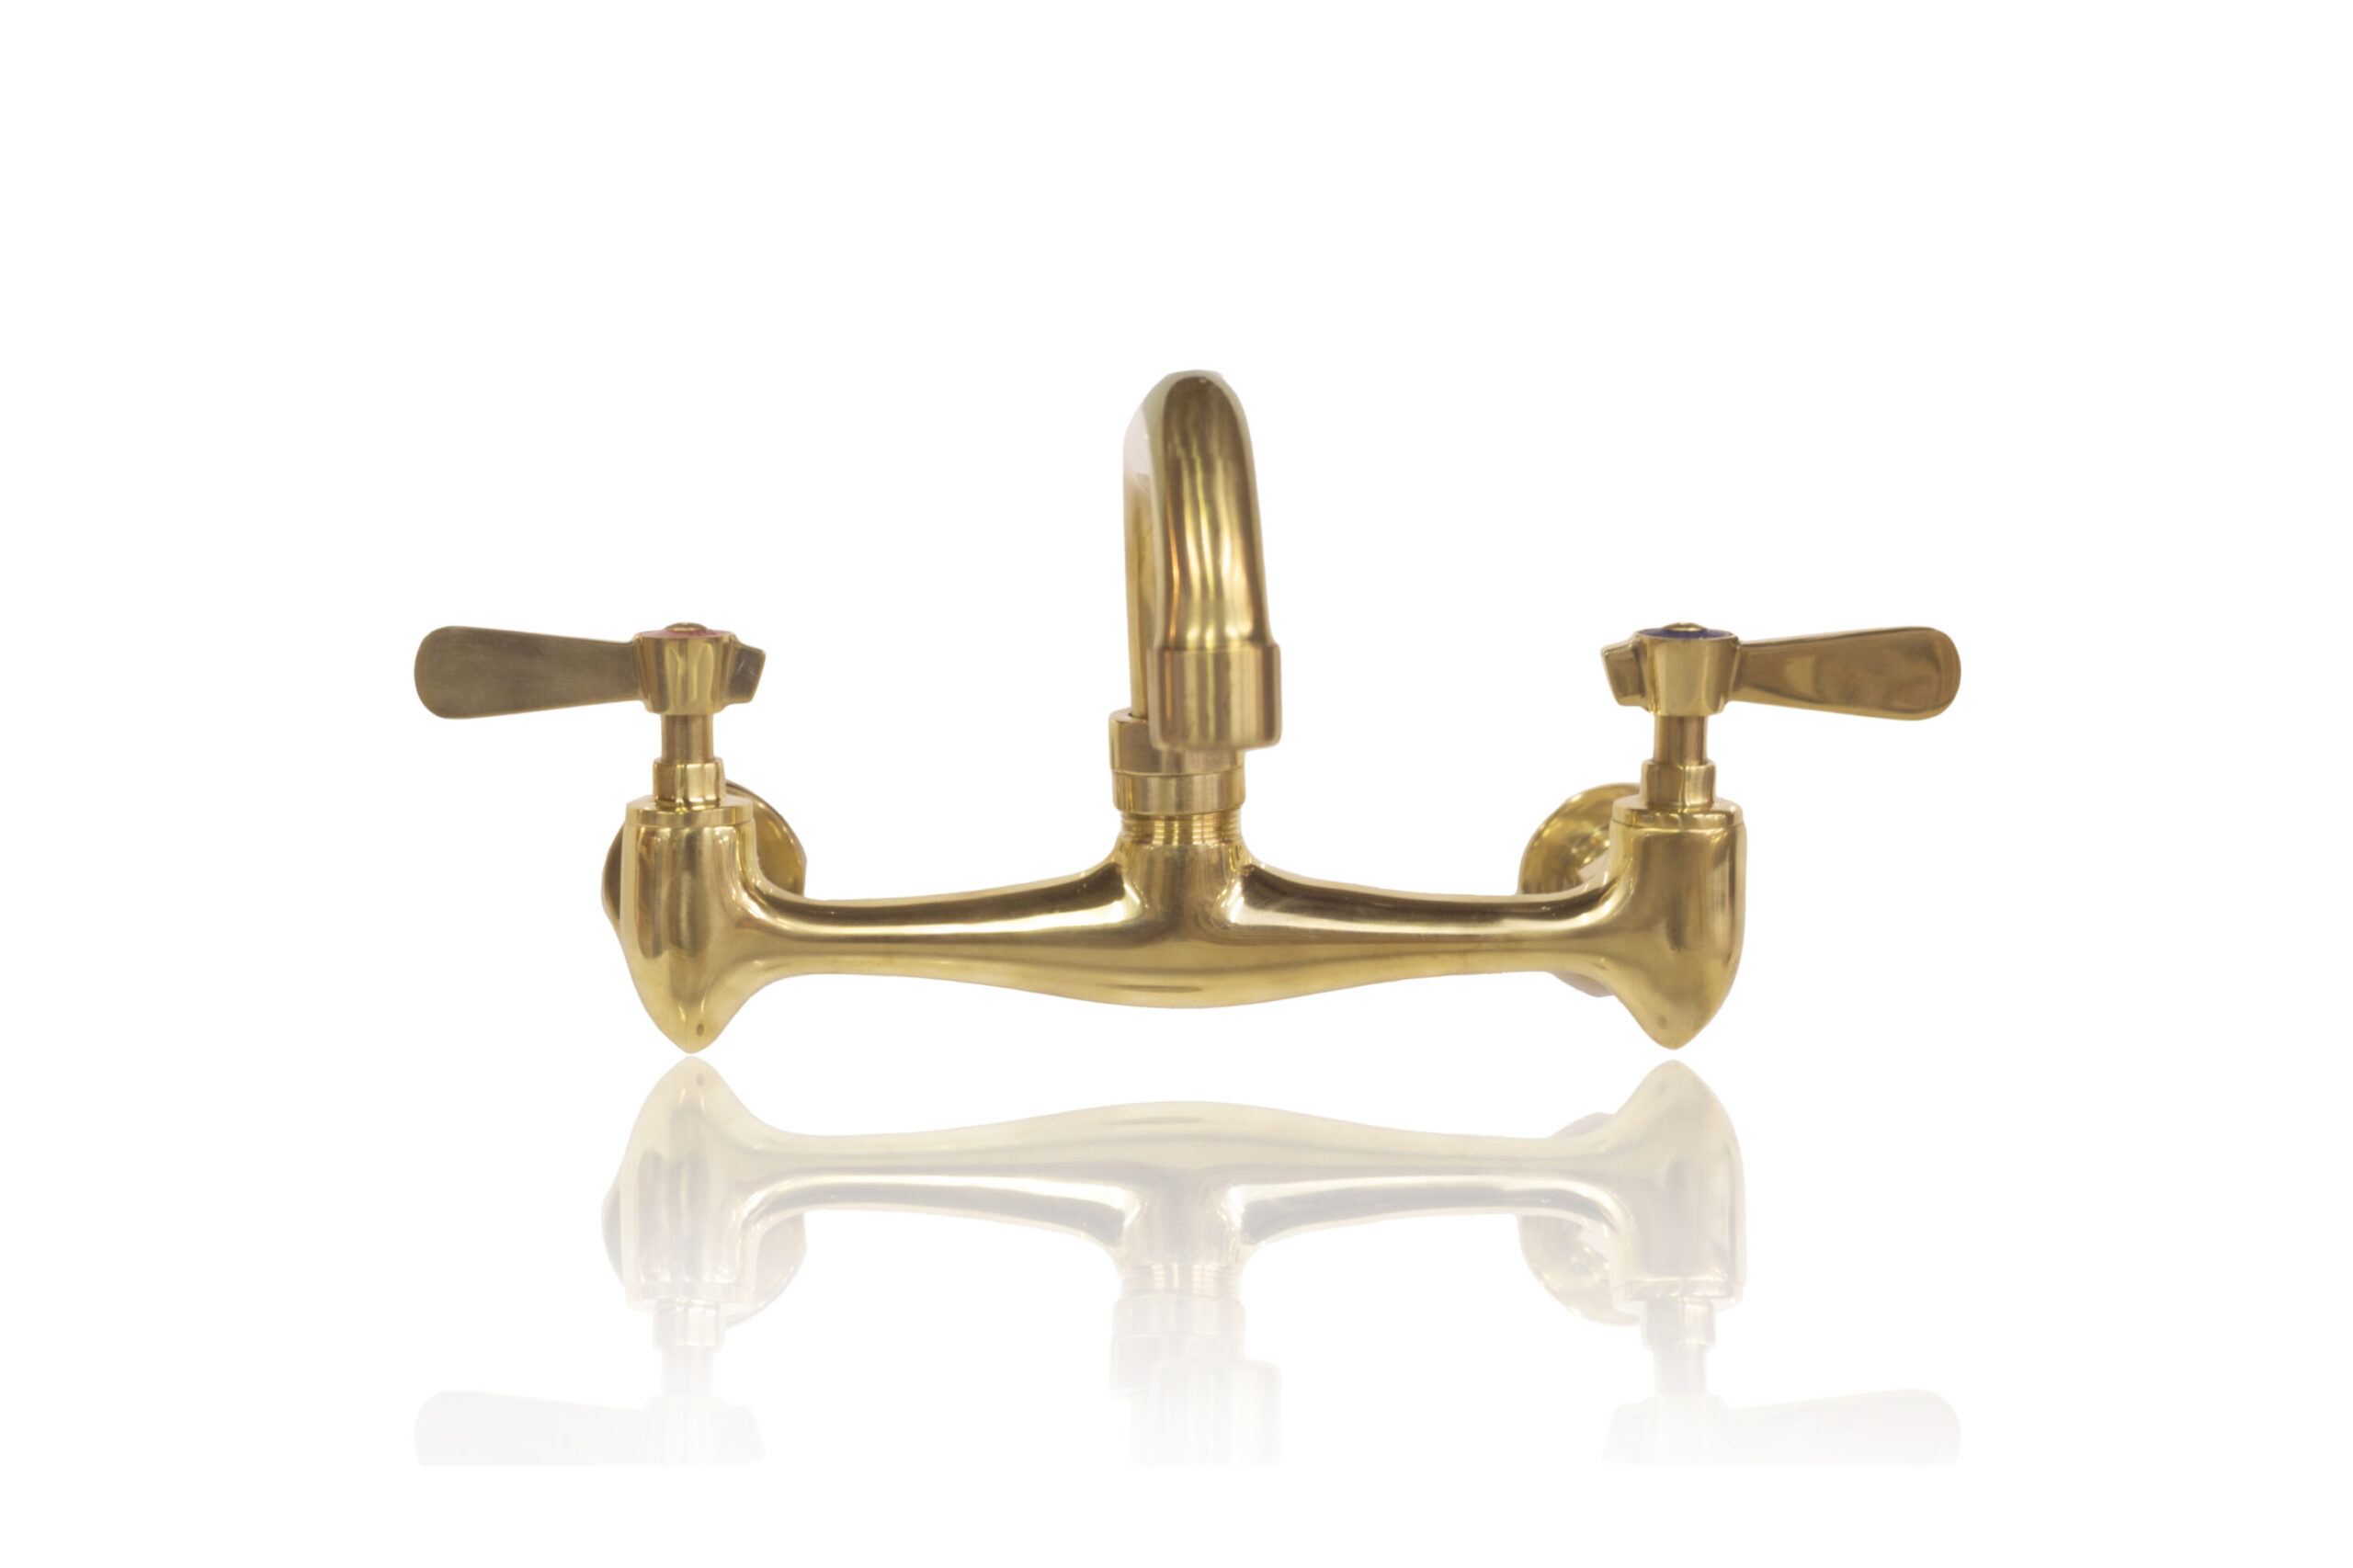 How to Get an Antique Brass Faucet for Way Less